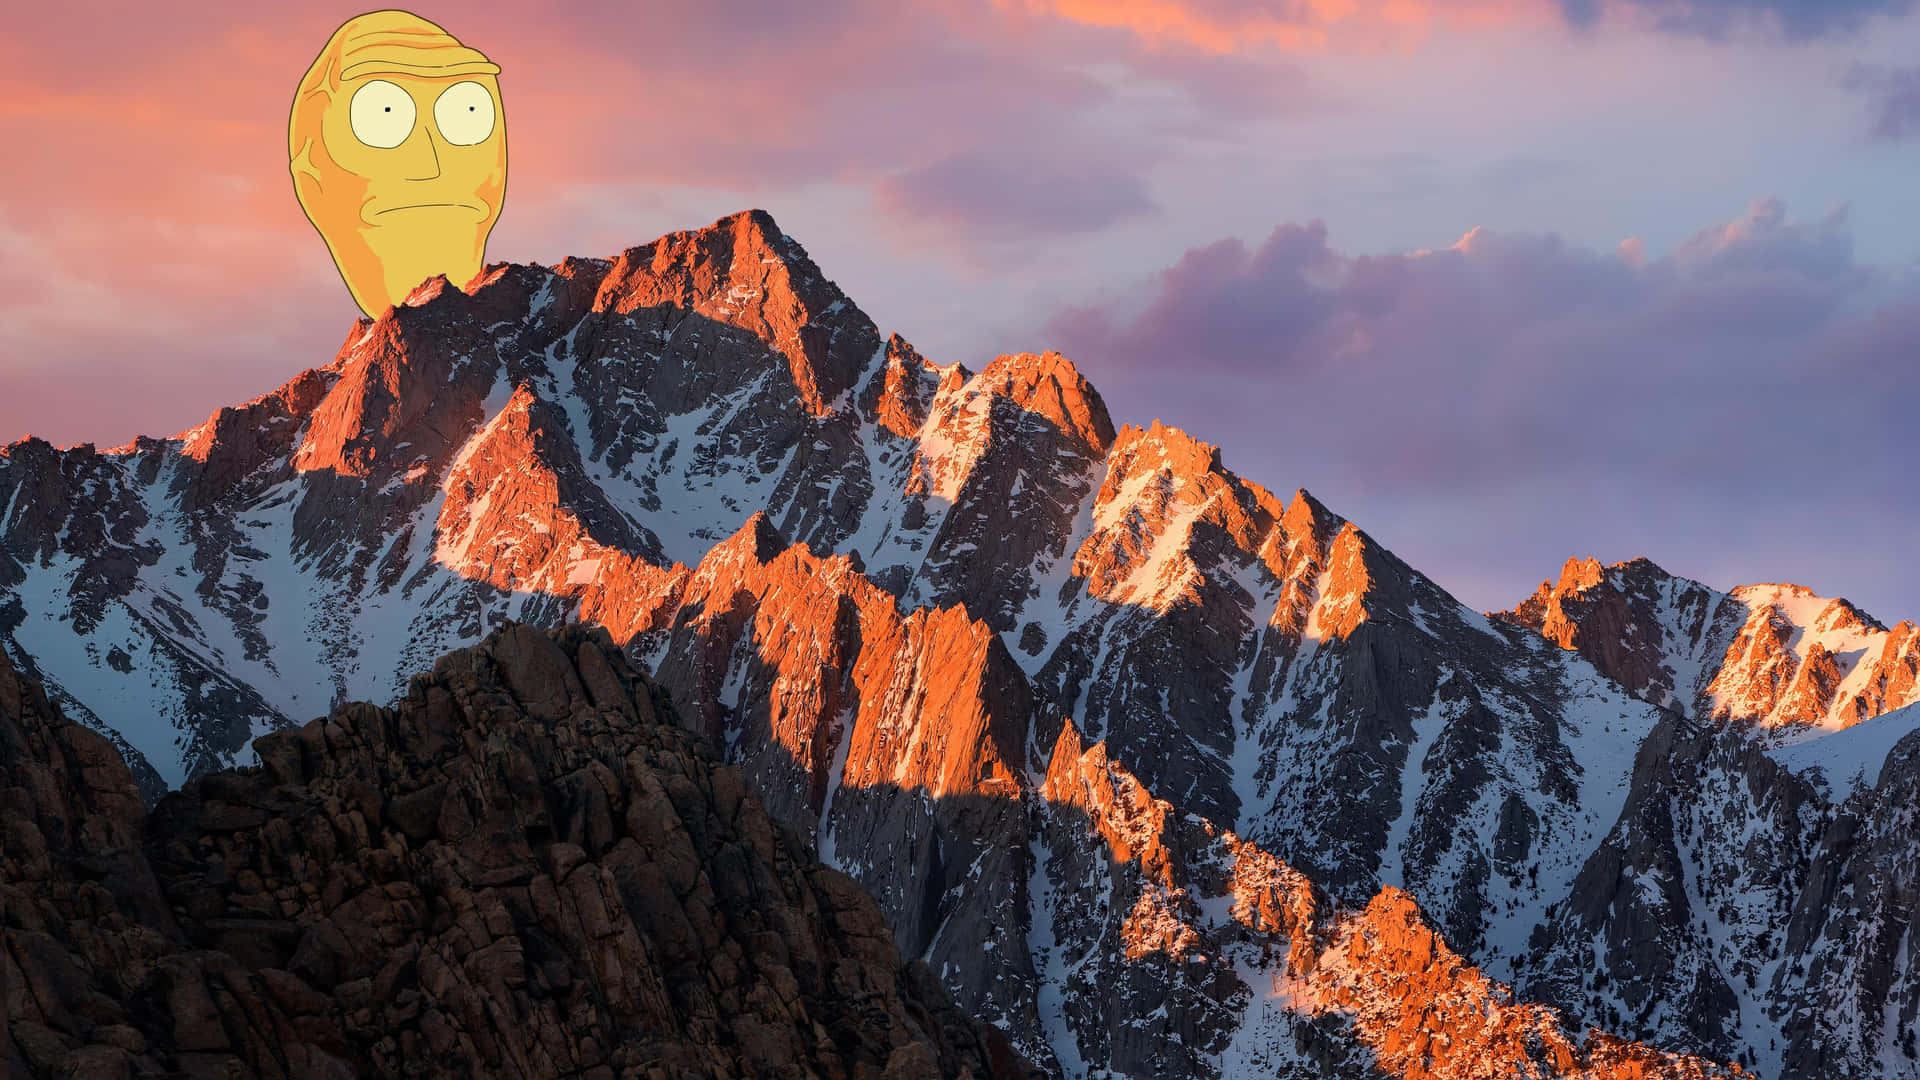 A Cartoon Character Is Standing On Top Of A Mountain